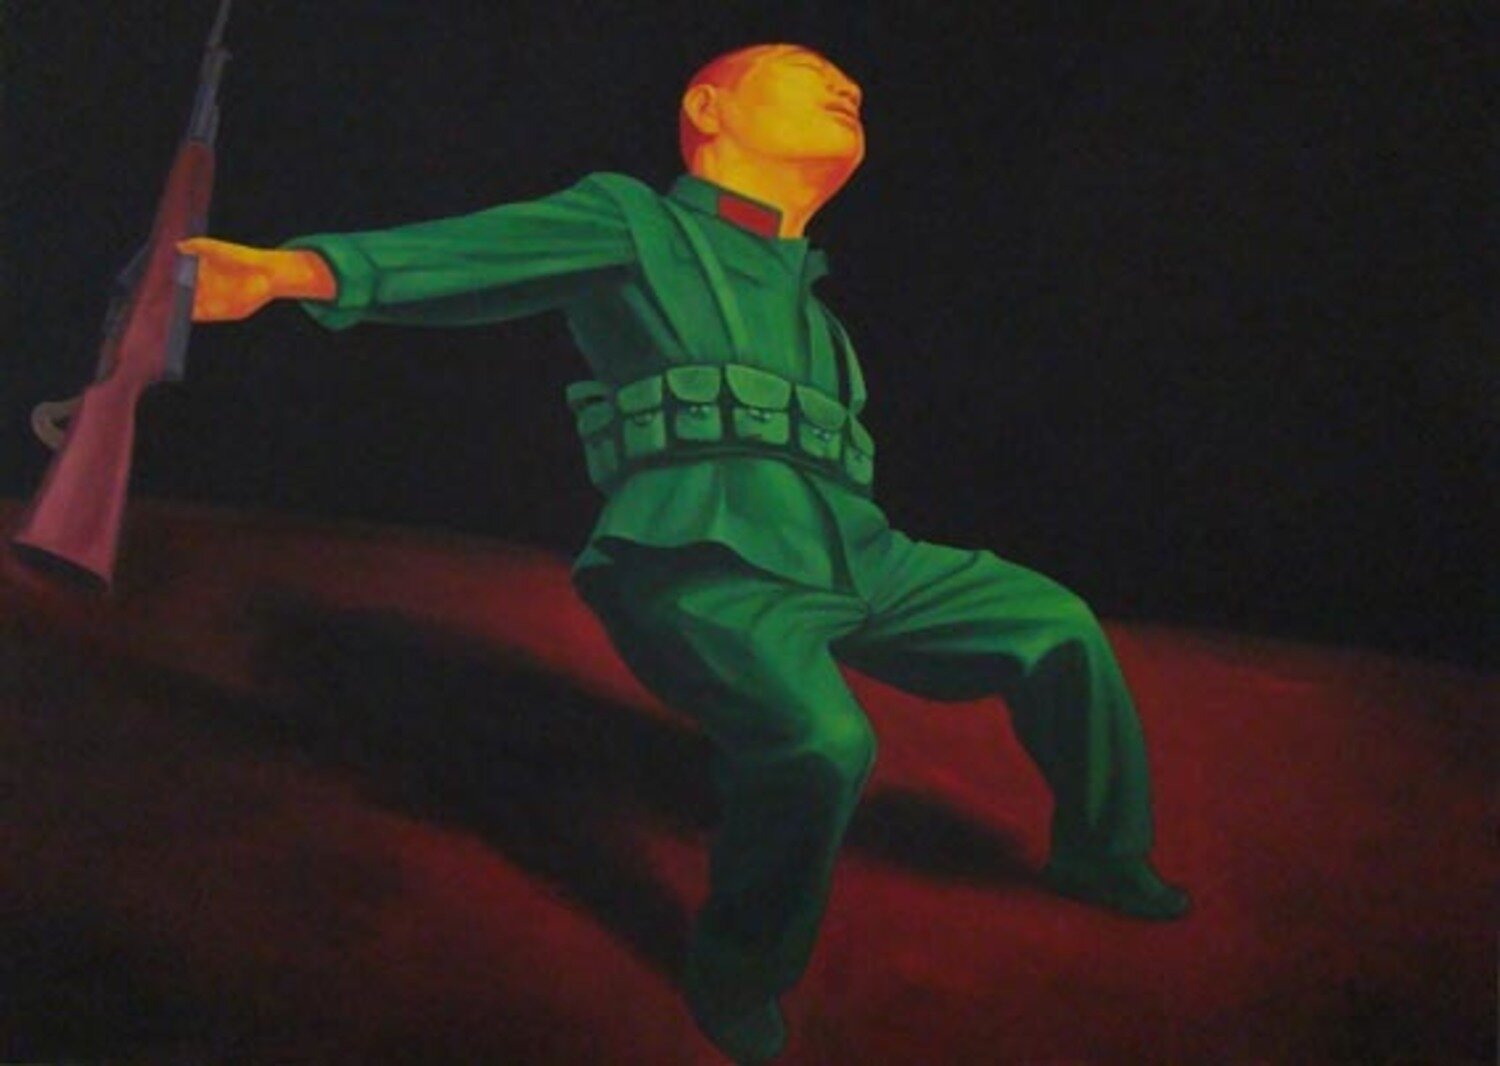   Untitled, 2008,  Oil on Canvas, 152 x 213 cm 